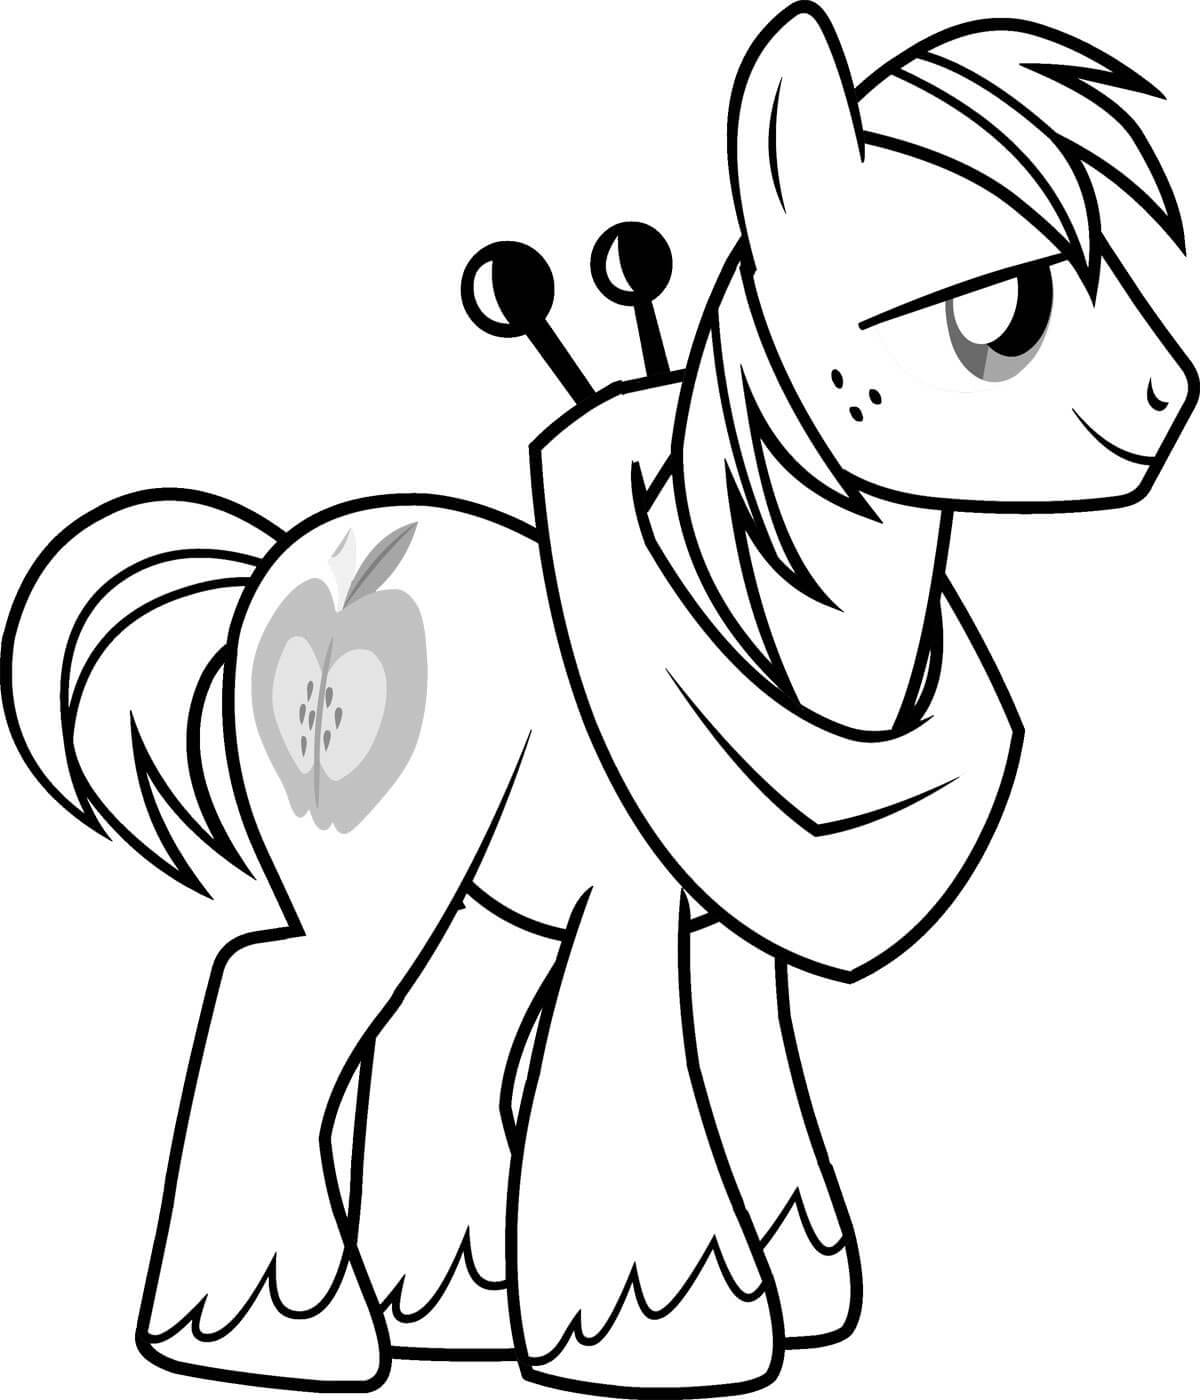 420 Colouring Pages For My Little Pony Images & Pictures In HD